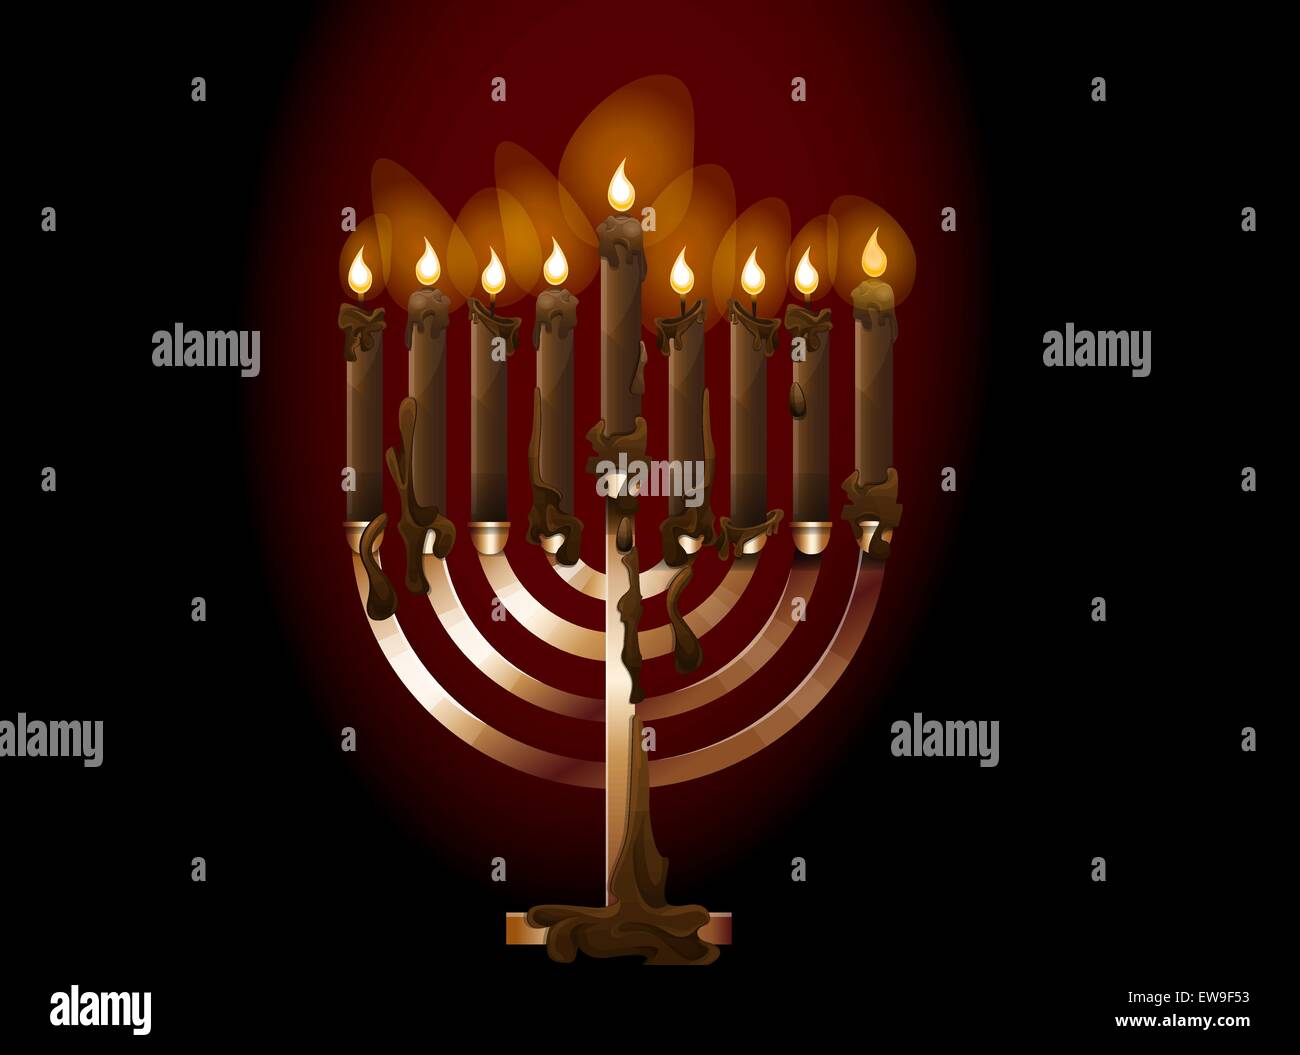 Menorah, a nine-branched candelabrum with lighted candles, vector illustration Stock Vector